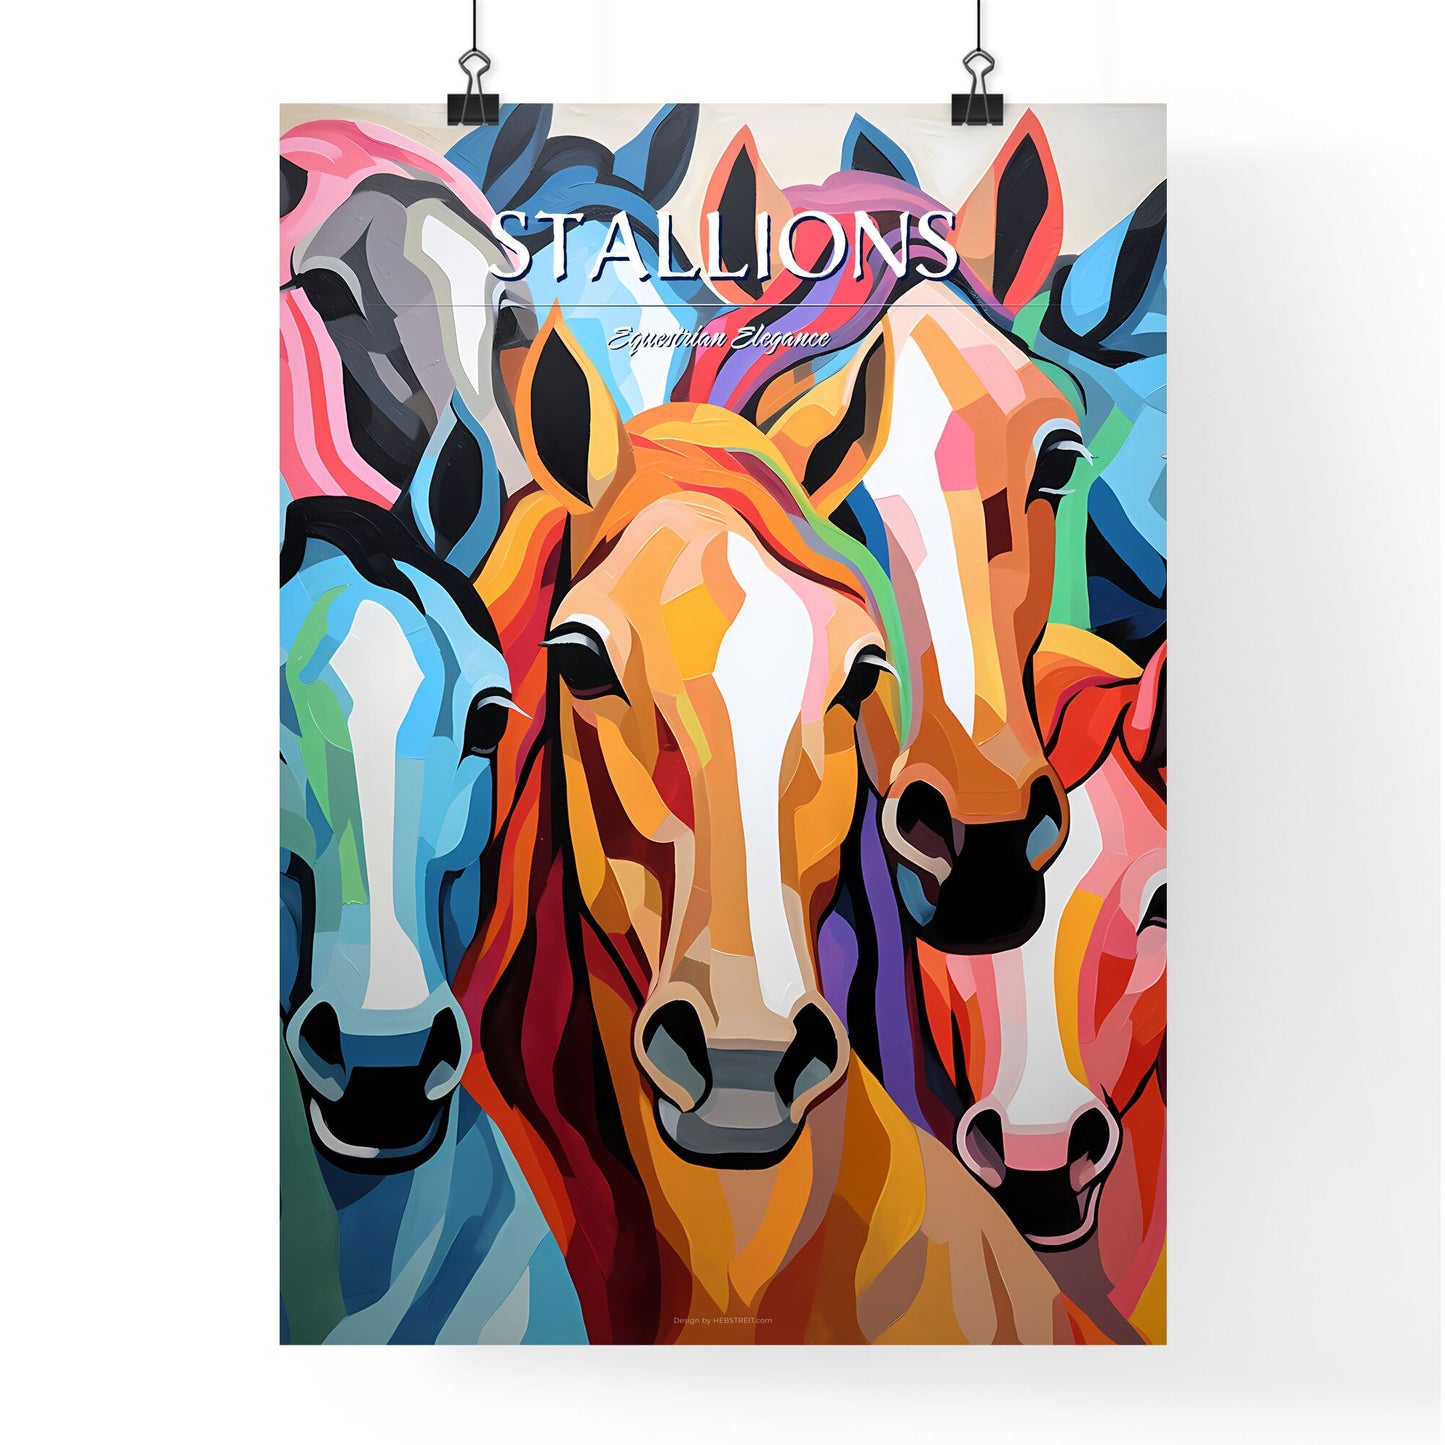 Group Of Horses Painted On A Wall Art Print Default Title